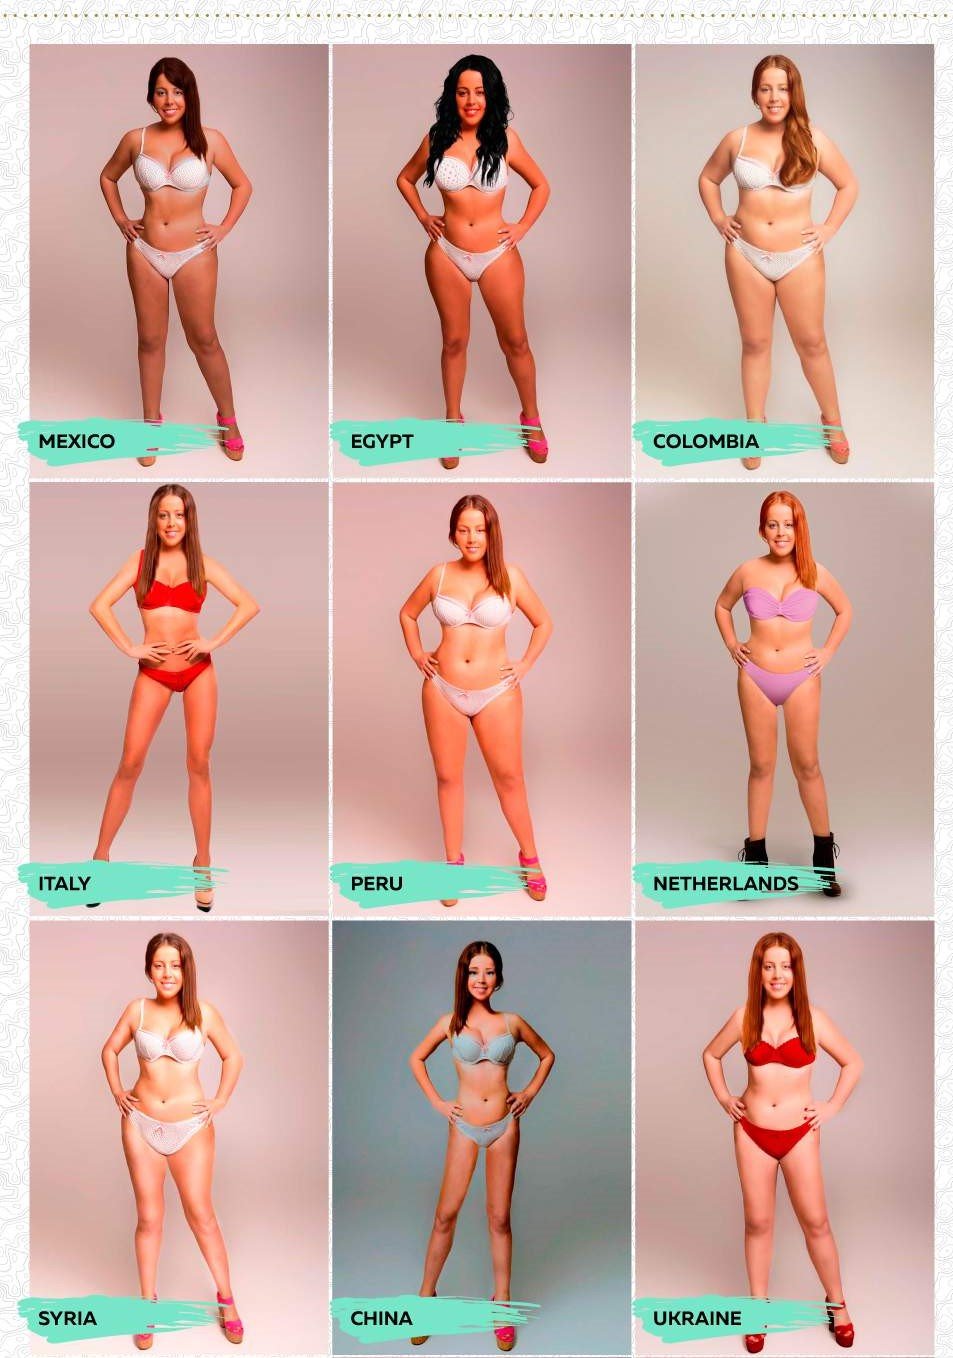 Photographs of the same woman photoshopped to suit the beauty standards of different countries